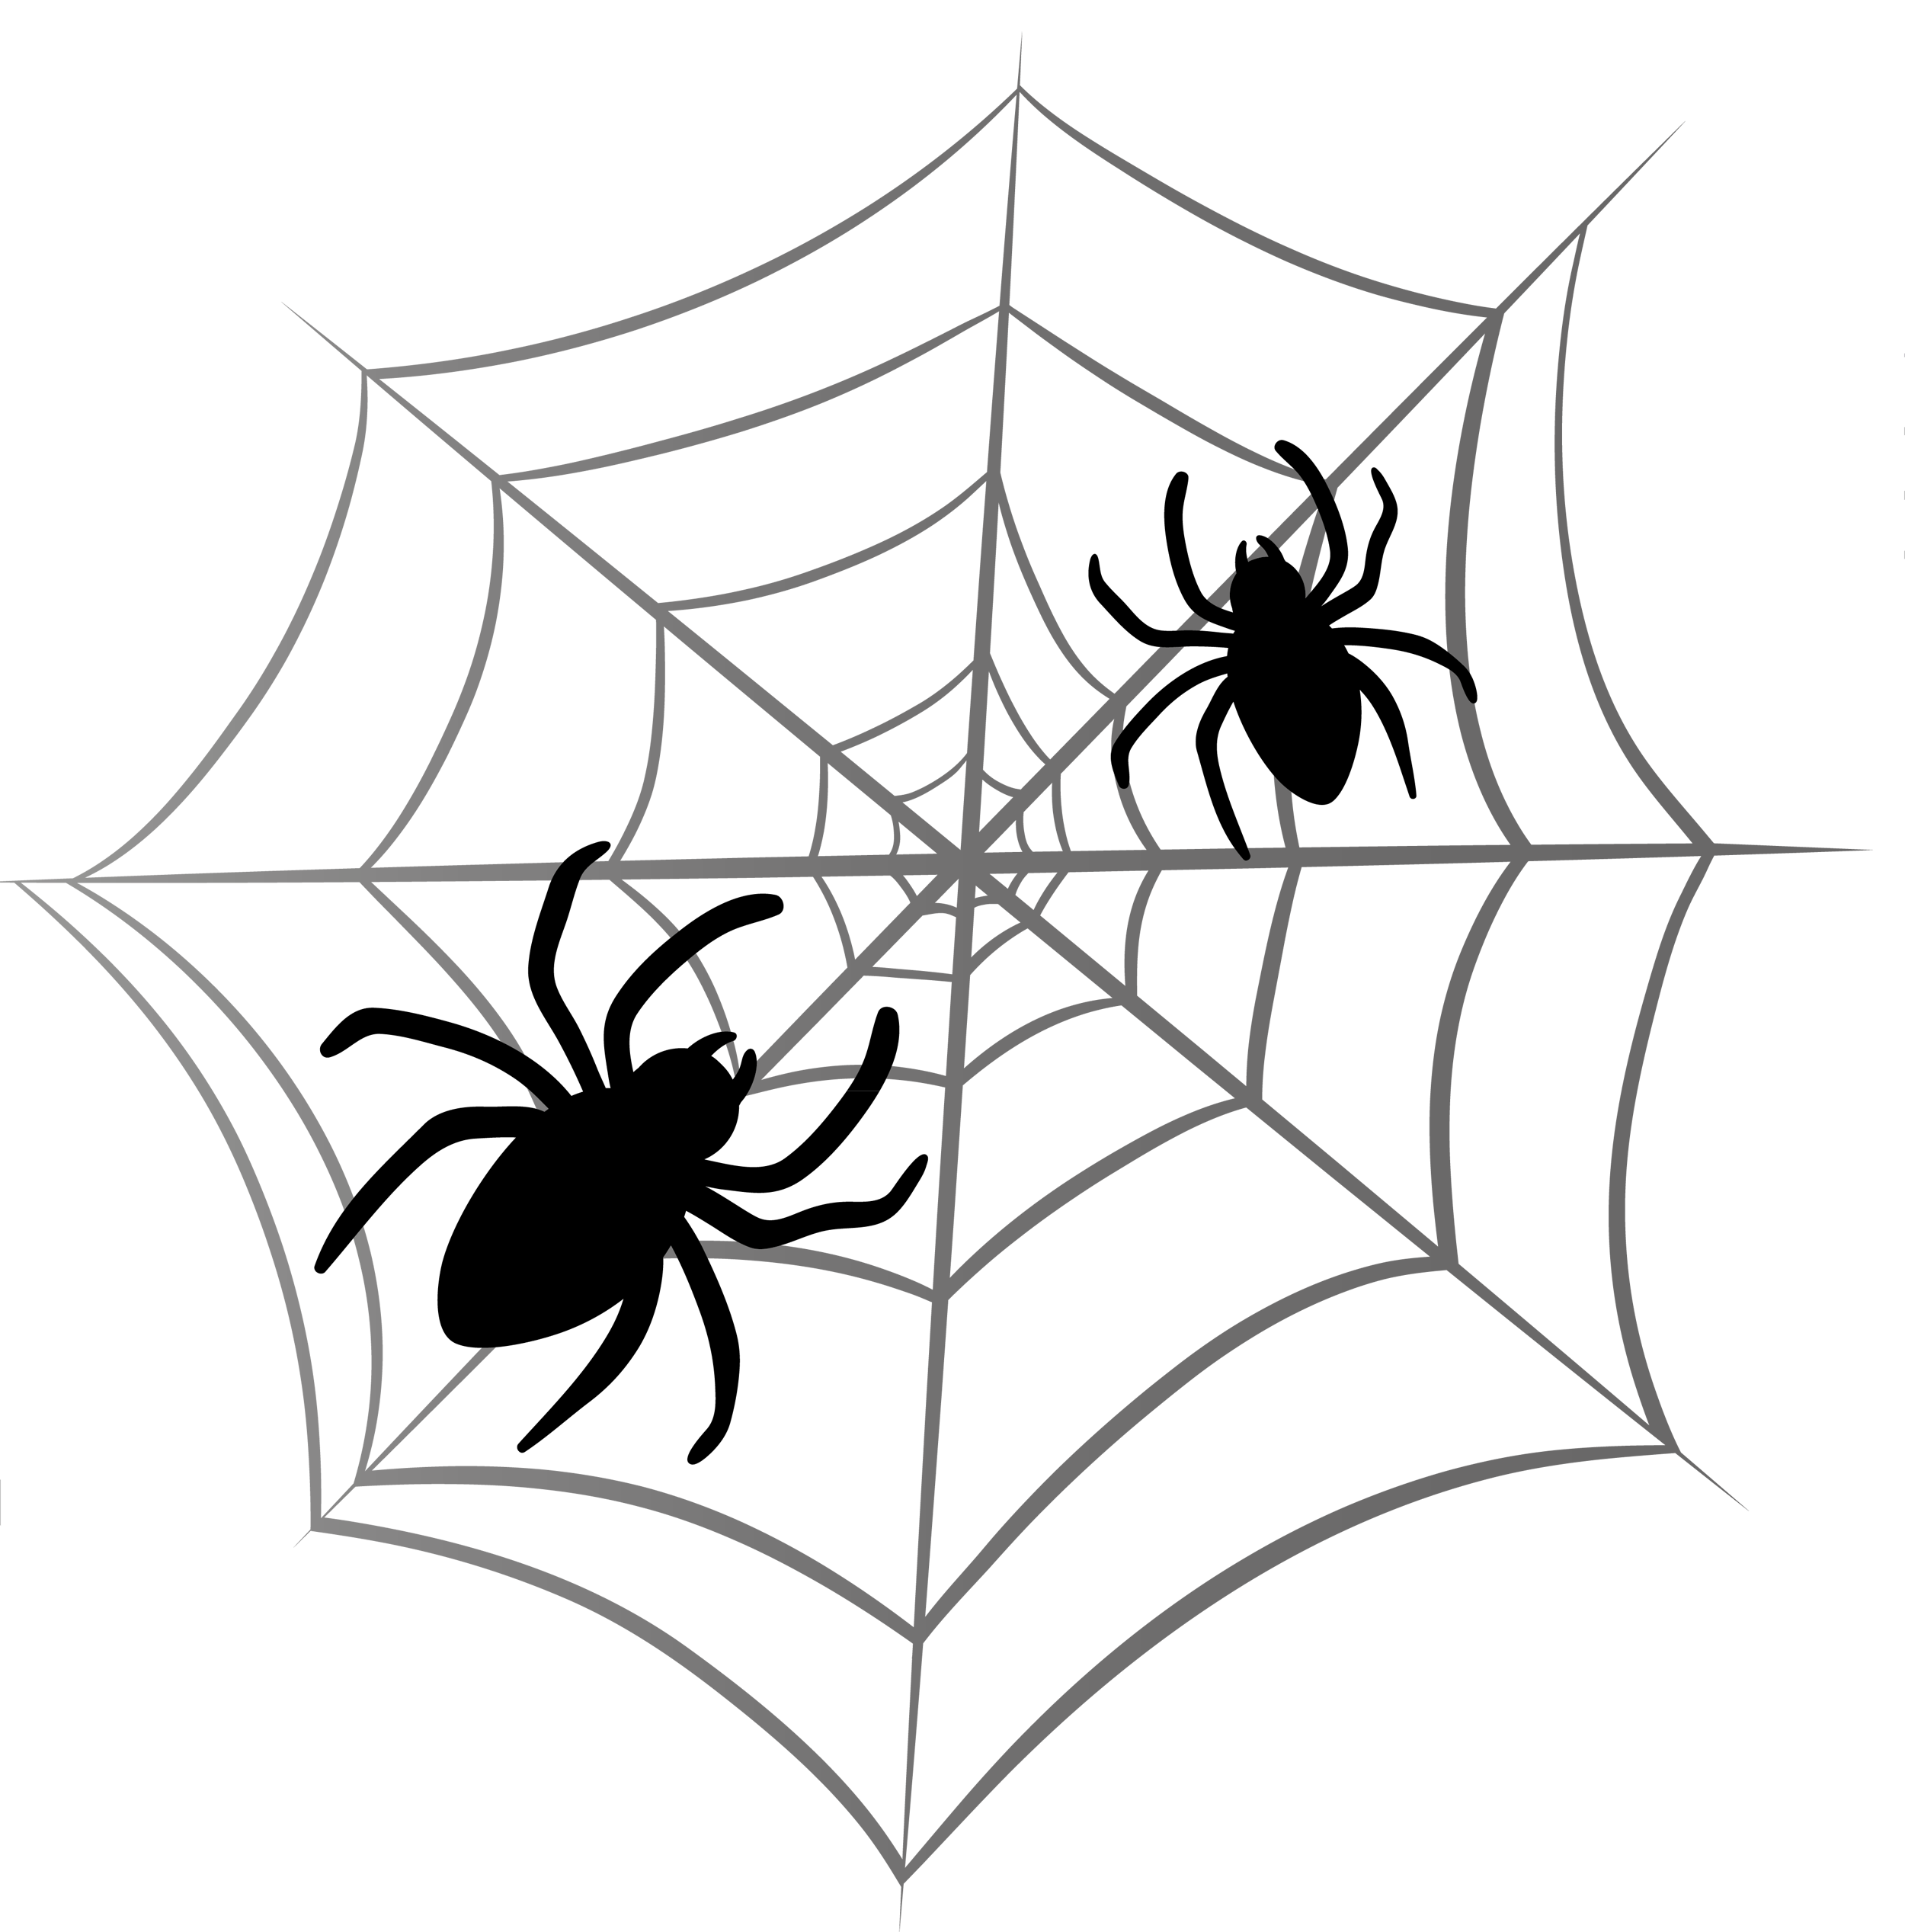 Halloween Spider Web PNG Clipart